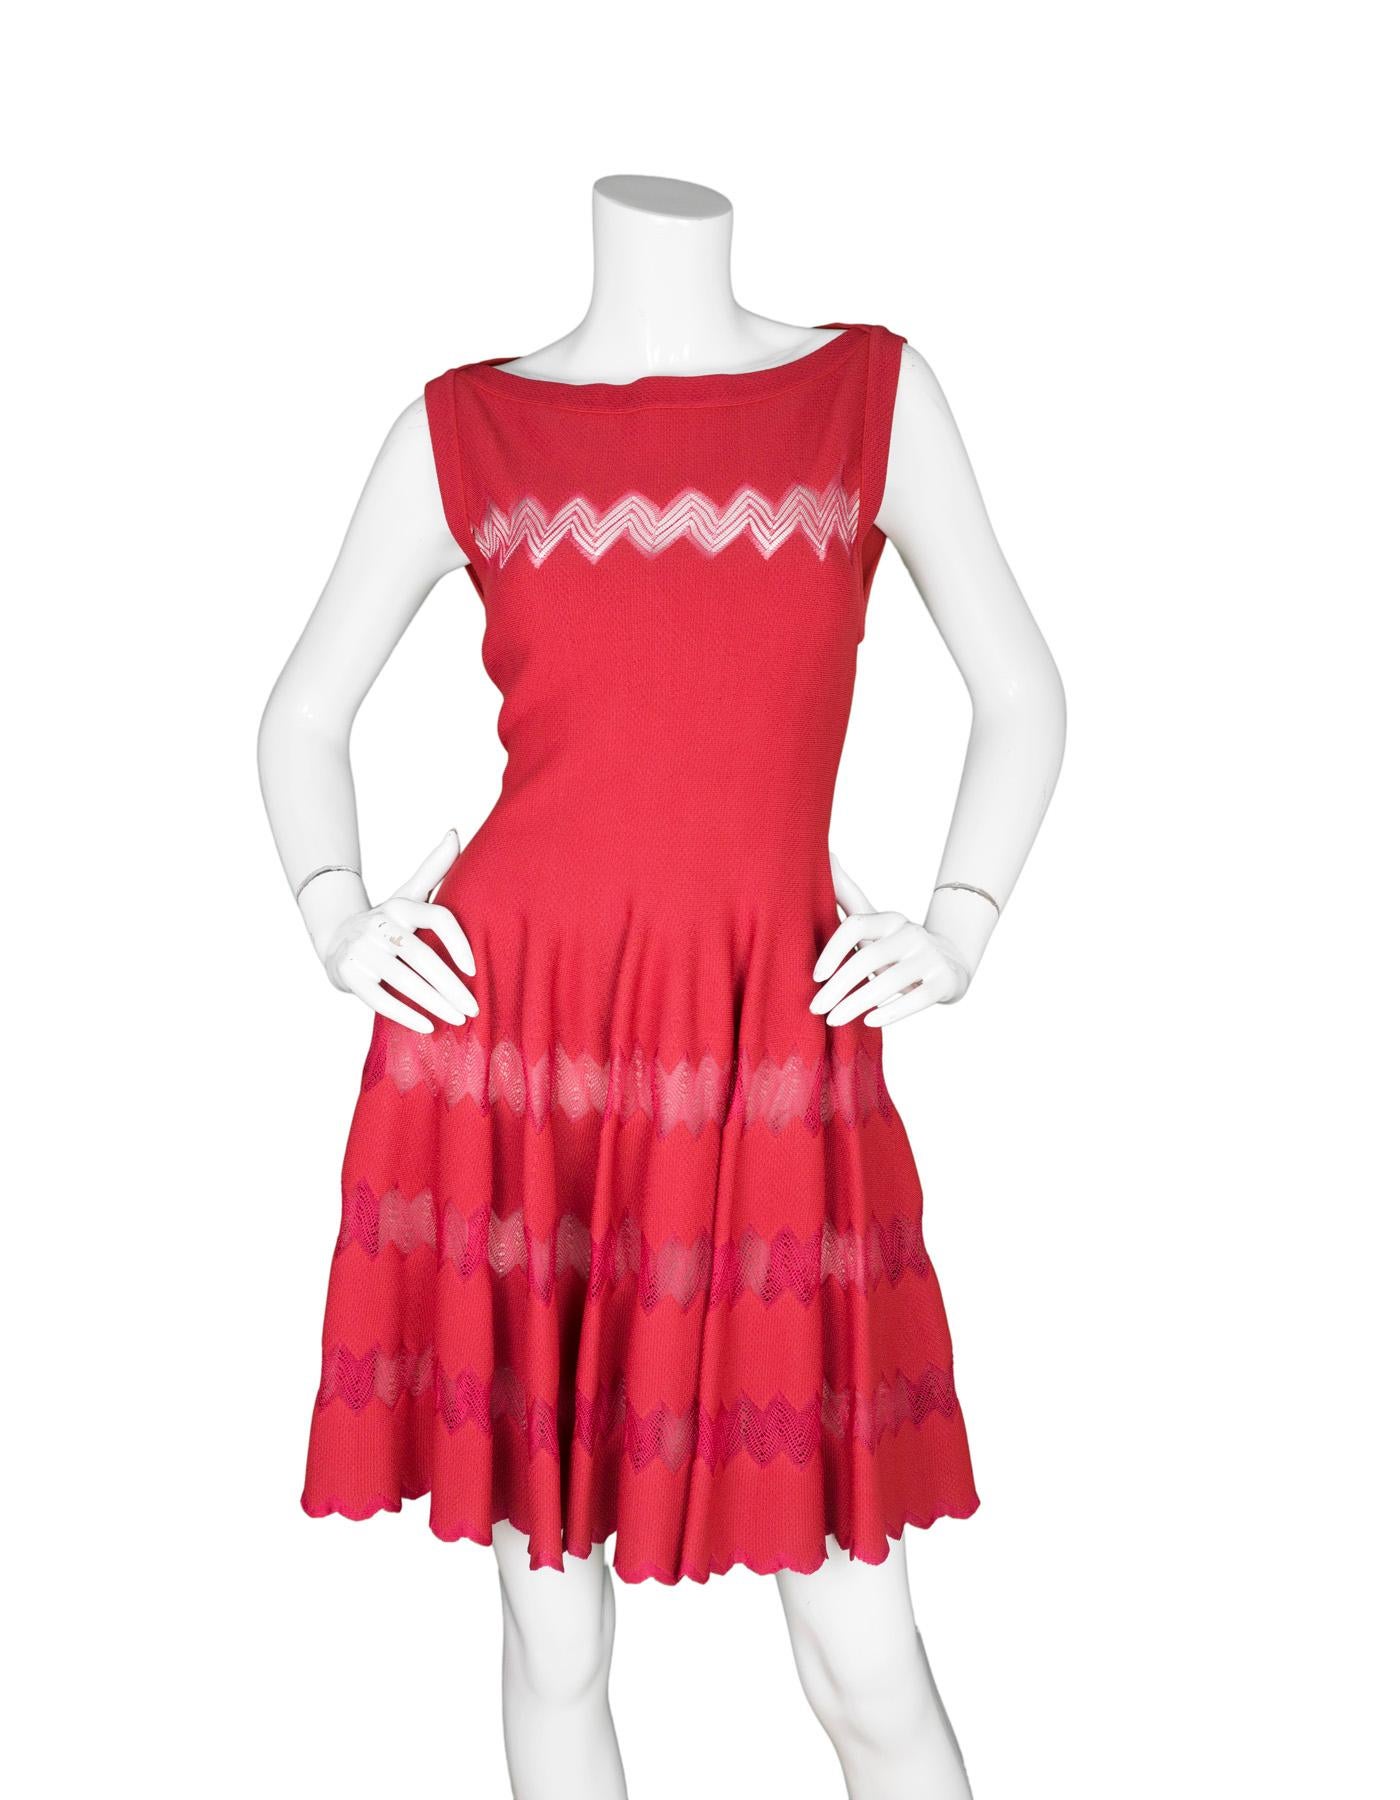 Alaia Red Fit Flare Sleeveless Zig Zag Mesh Dress sz FR 44

Made In: Italy
Color: Red
Materials: 50% viscose, 40% silk, 10% polyester
Lining: Nude, 100% silk
Opening/Closure: Back center zip up closure
Overall Condition: Excellent pre-owned